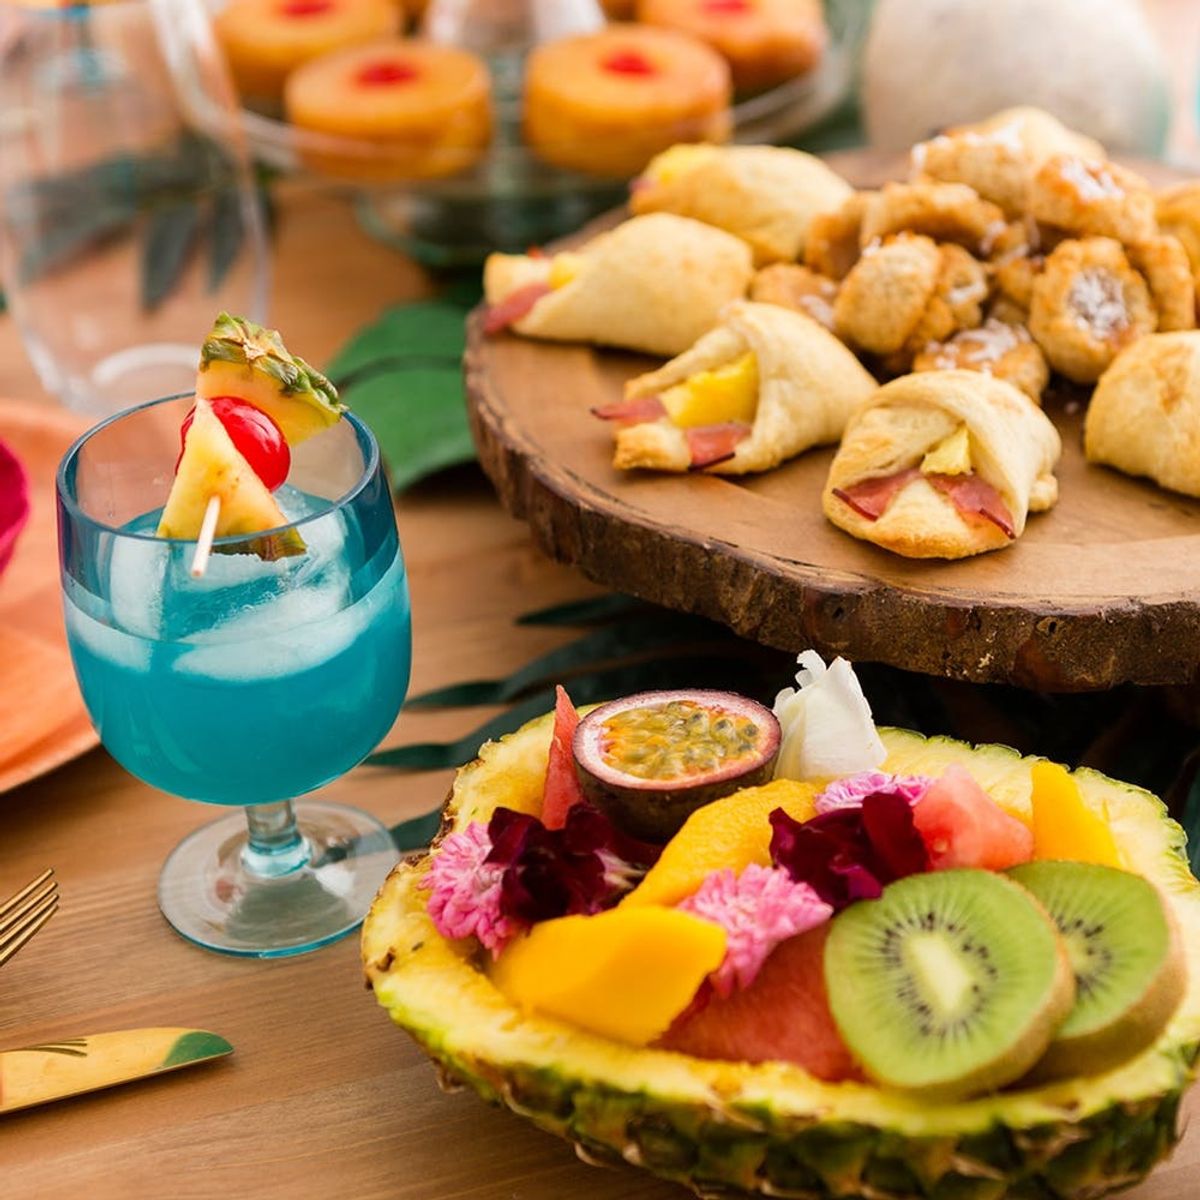 Make Way for This Moana-Inspired Boozy Brunch Recipe